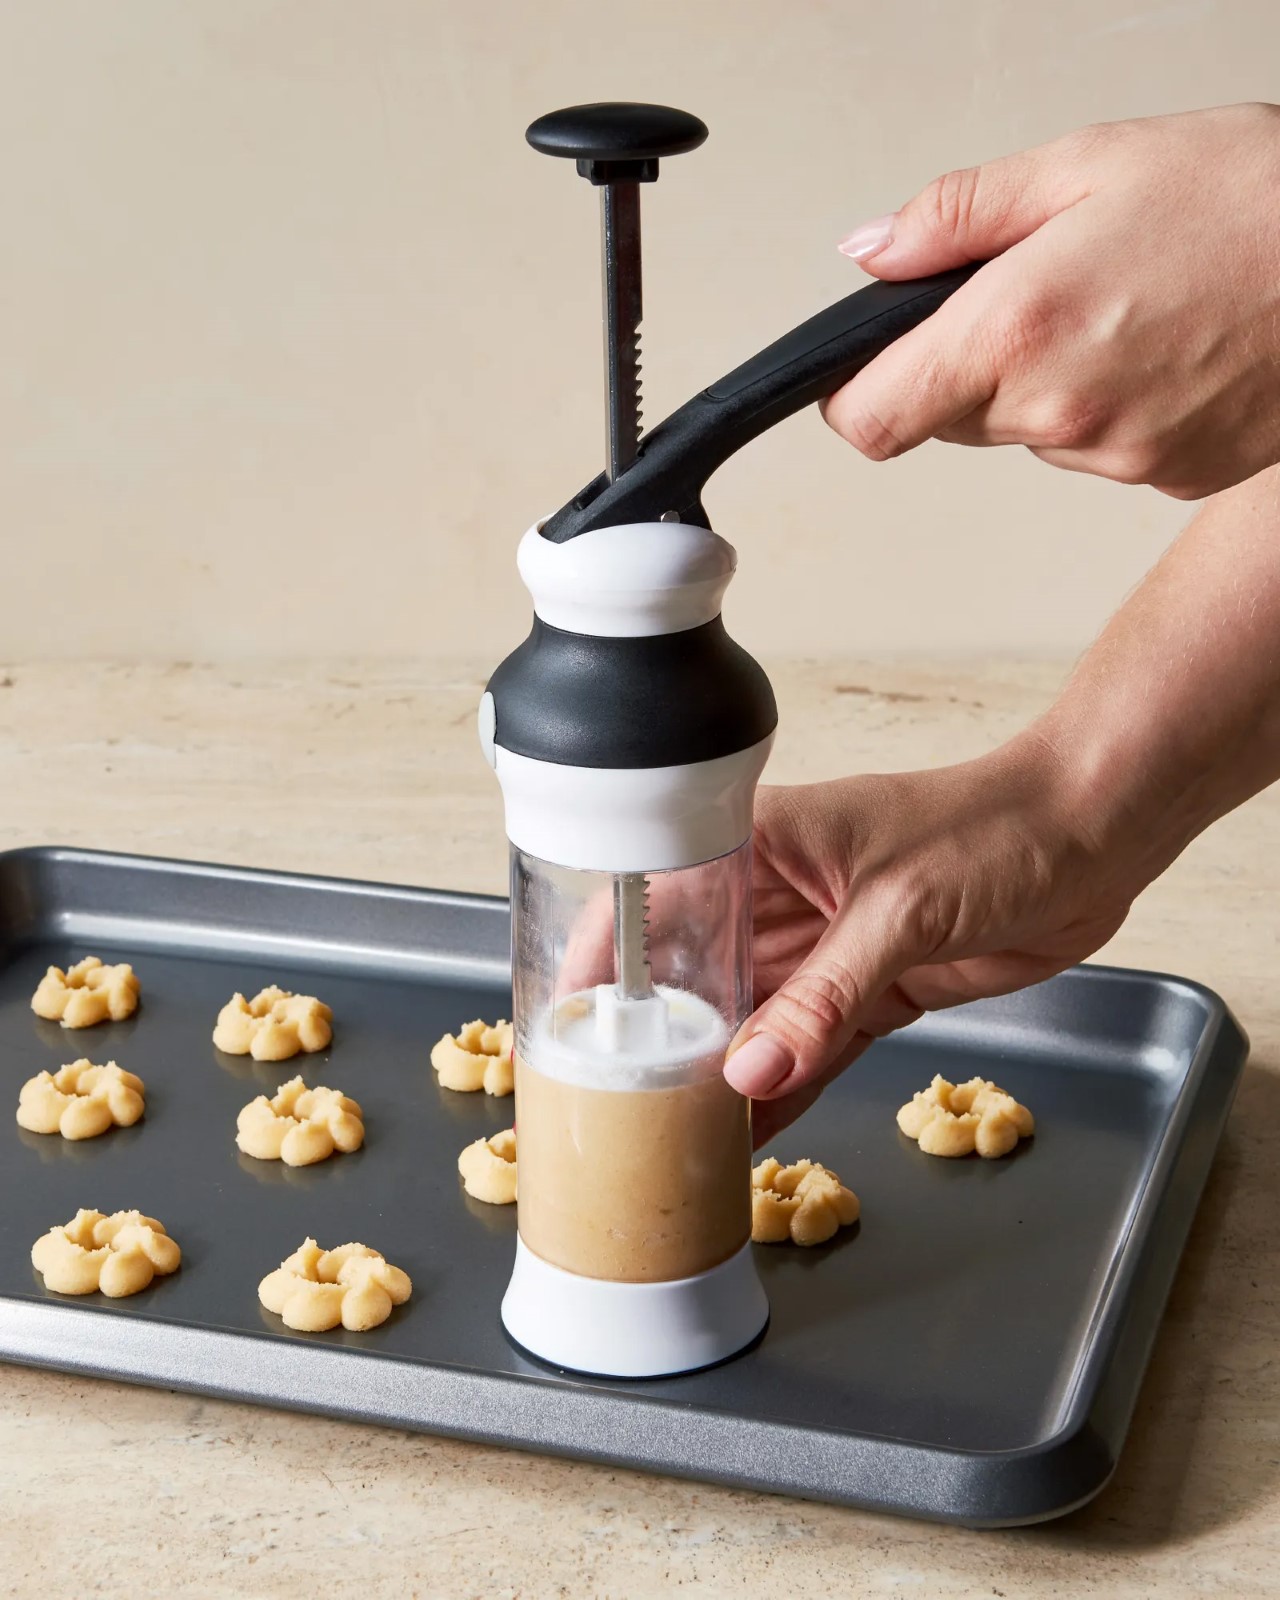 https://www.yankodesign.com/images/design_news/2021/12/the-oxo-cookie-press-lets-you-easily-pump-out-a-whole-bunch-of-perfectly-shaped-holiday-themed-cookies/oxo_cookie_press_2021_4.jpg